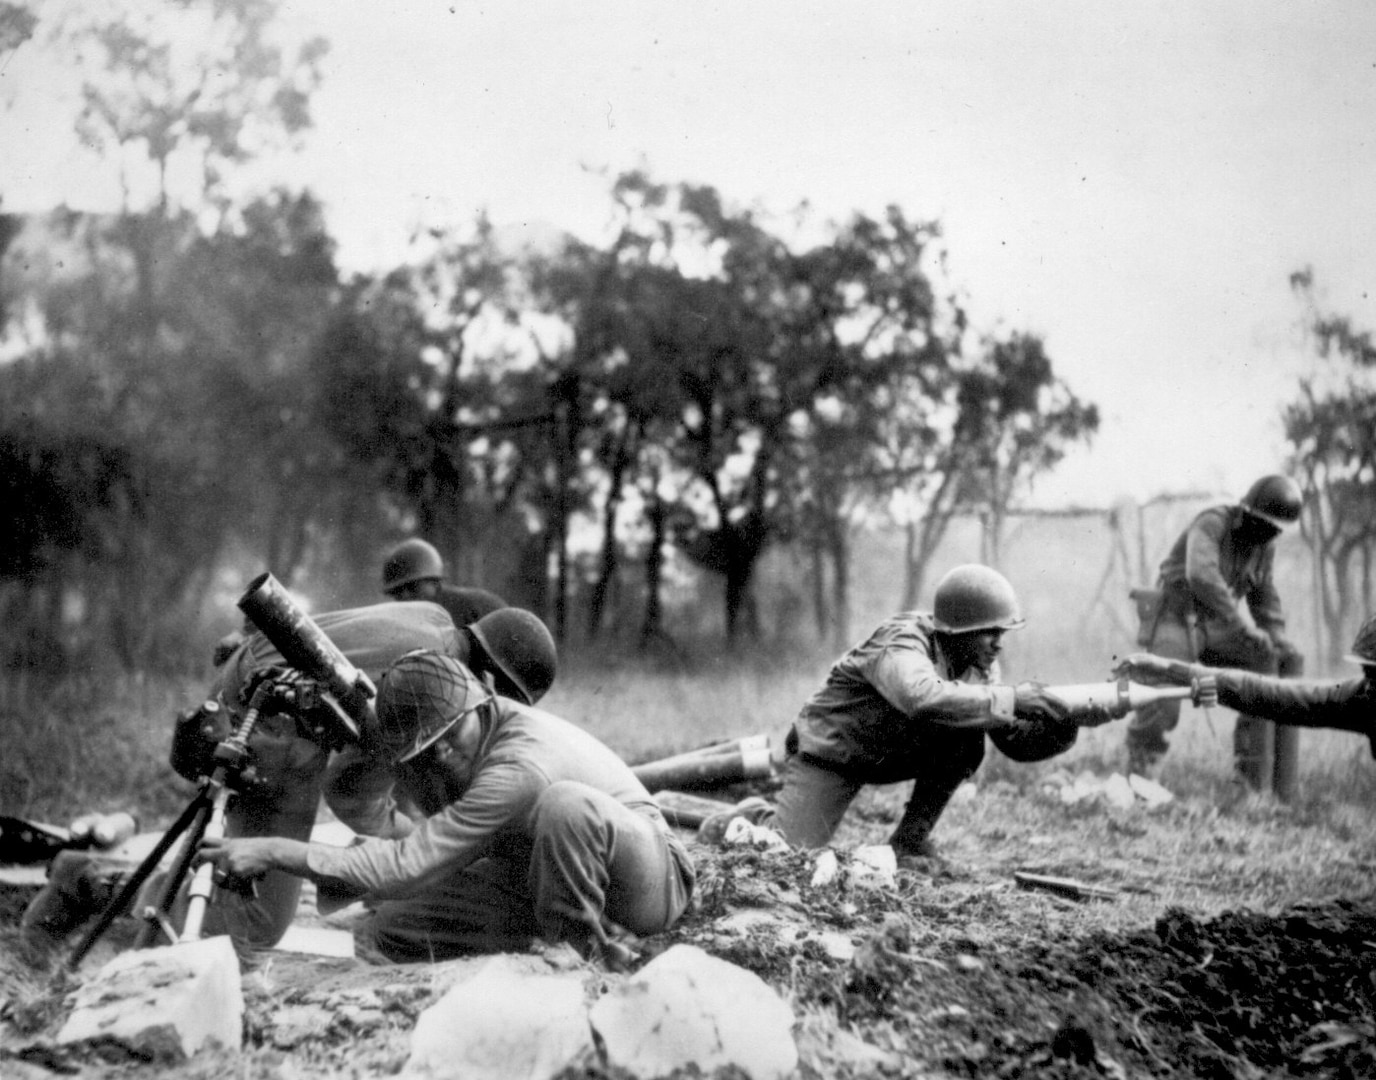 A mortar company of the 92nd Infantry Division passes ammunition and heaves it toward the Germans in an almost endless stream near Massa, Italy.